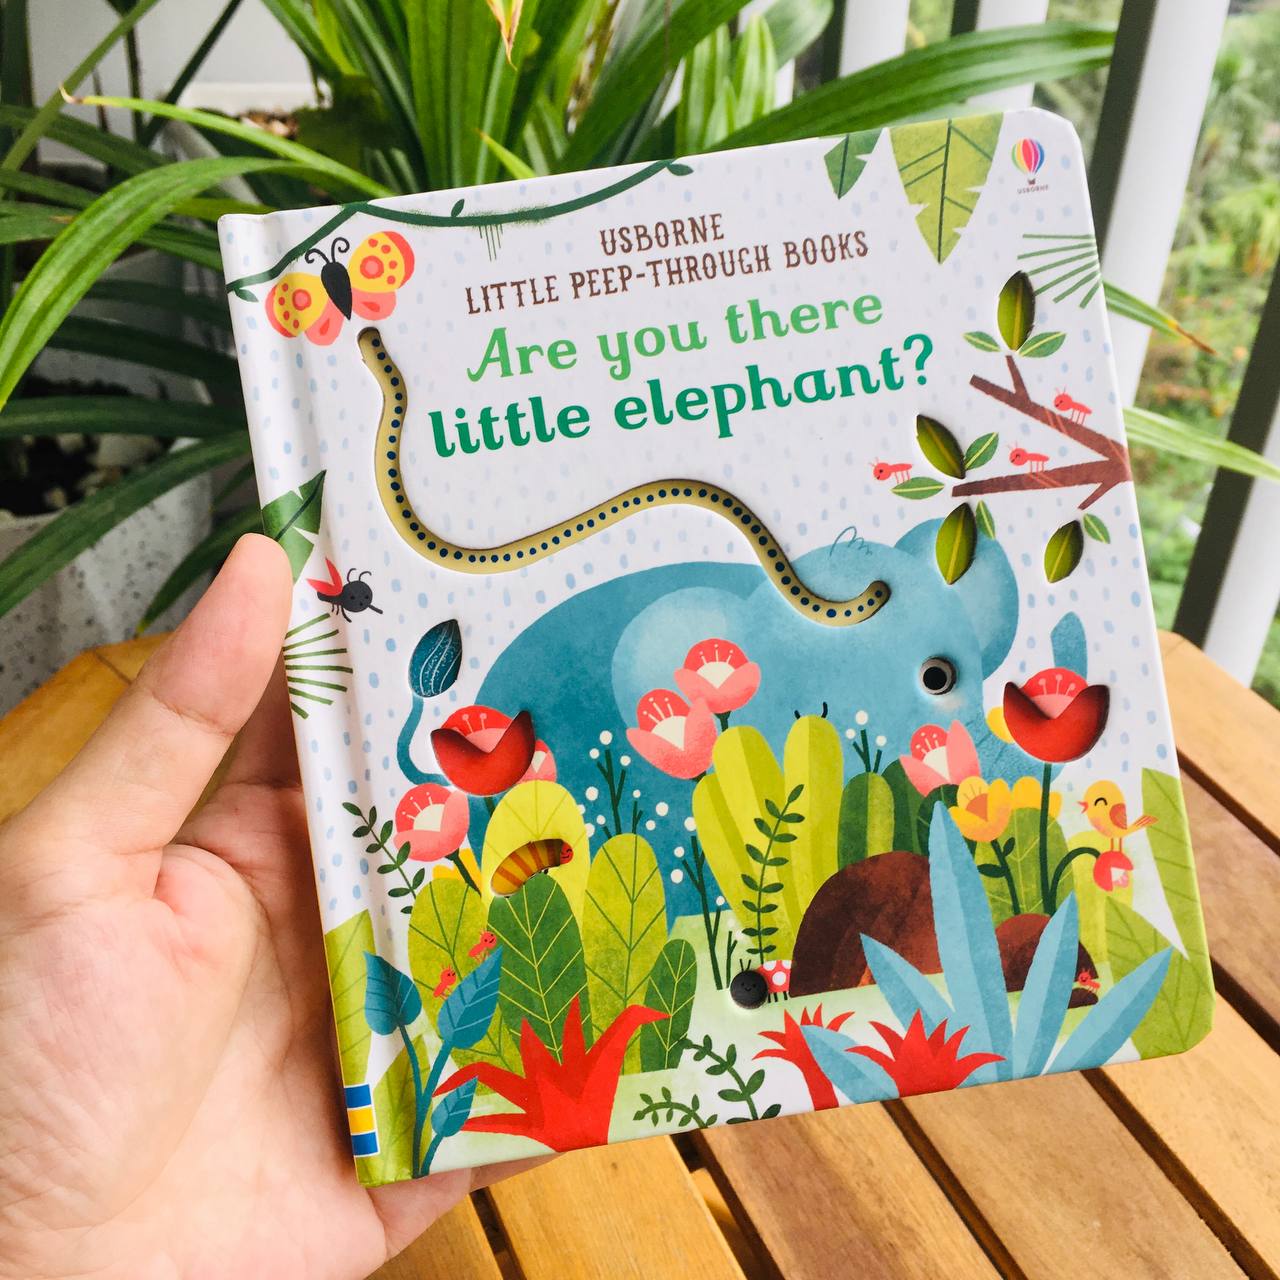 Sách - Anh: Are you there little elephane?